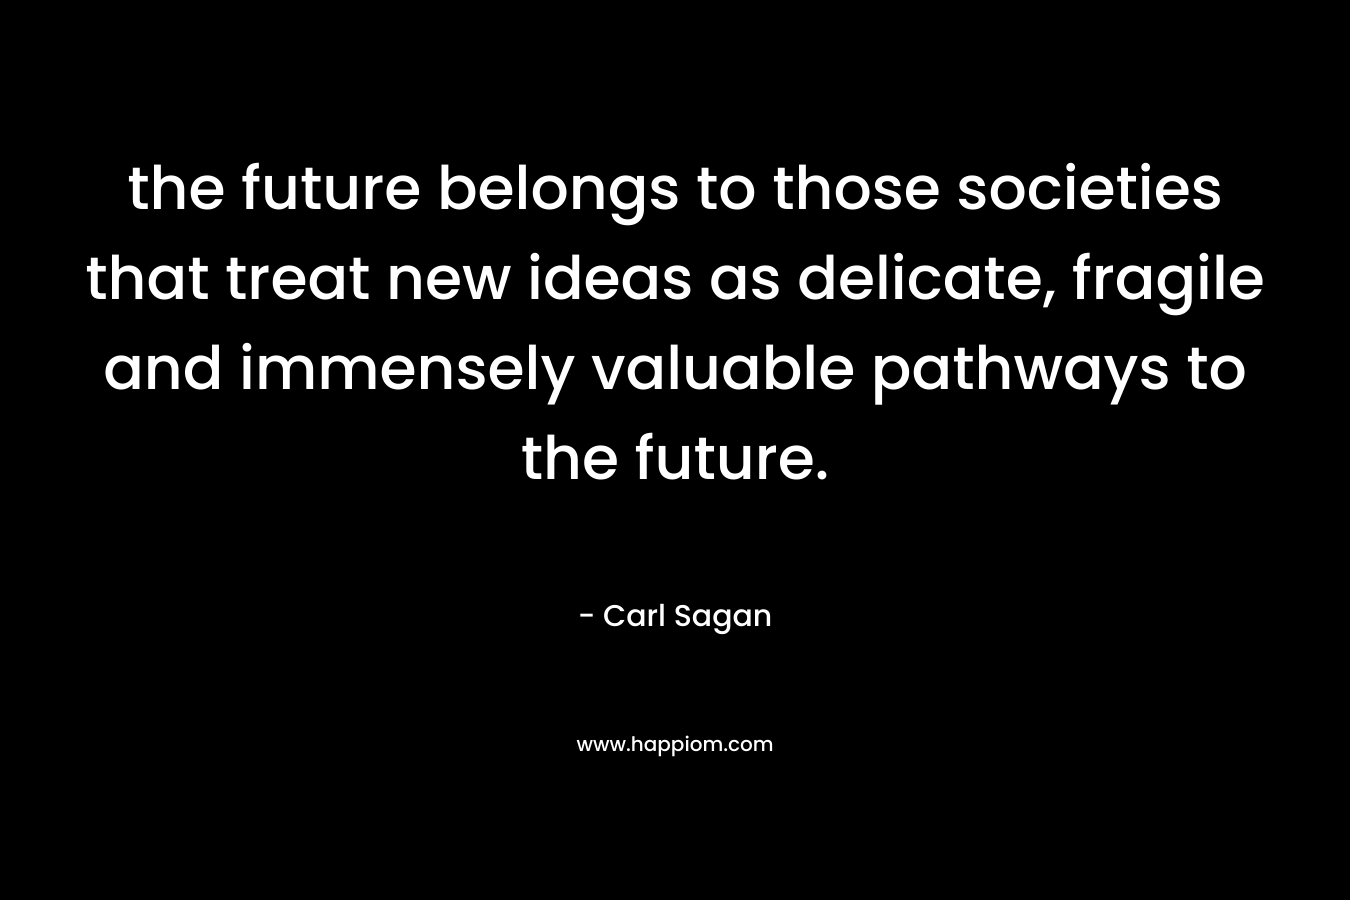 the future belongs to those societies that treat new ideas as delicate, fragile and immensely valuable pathways to the future.